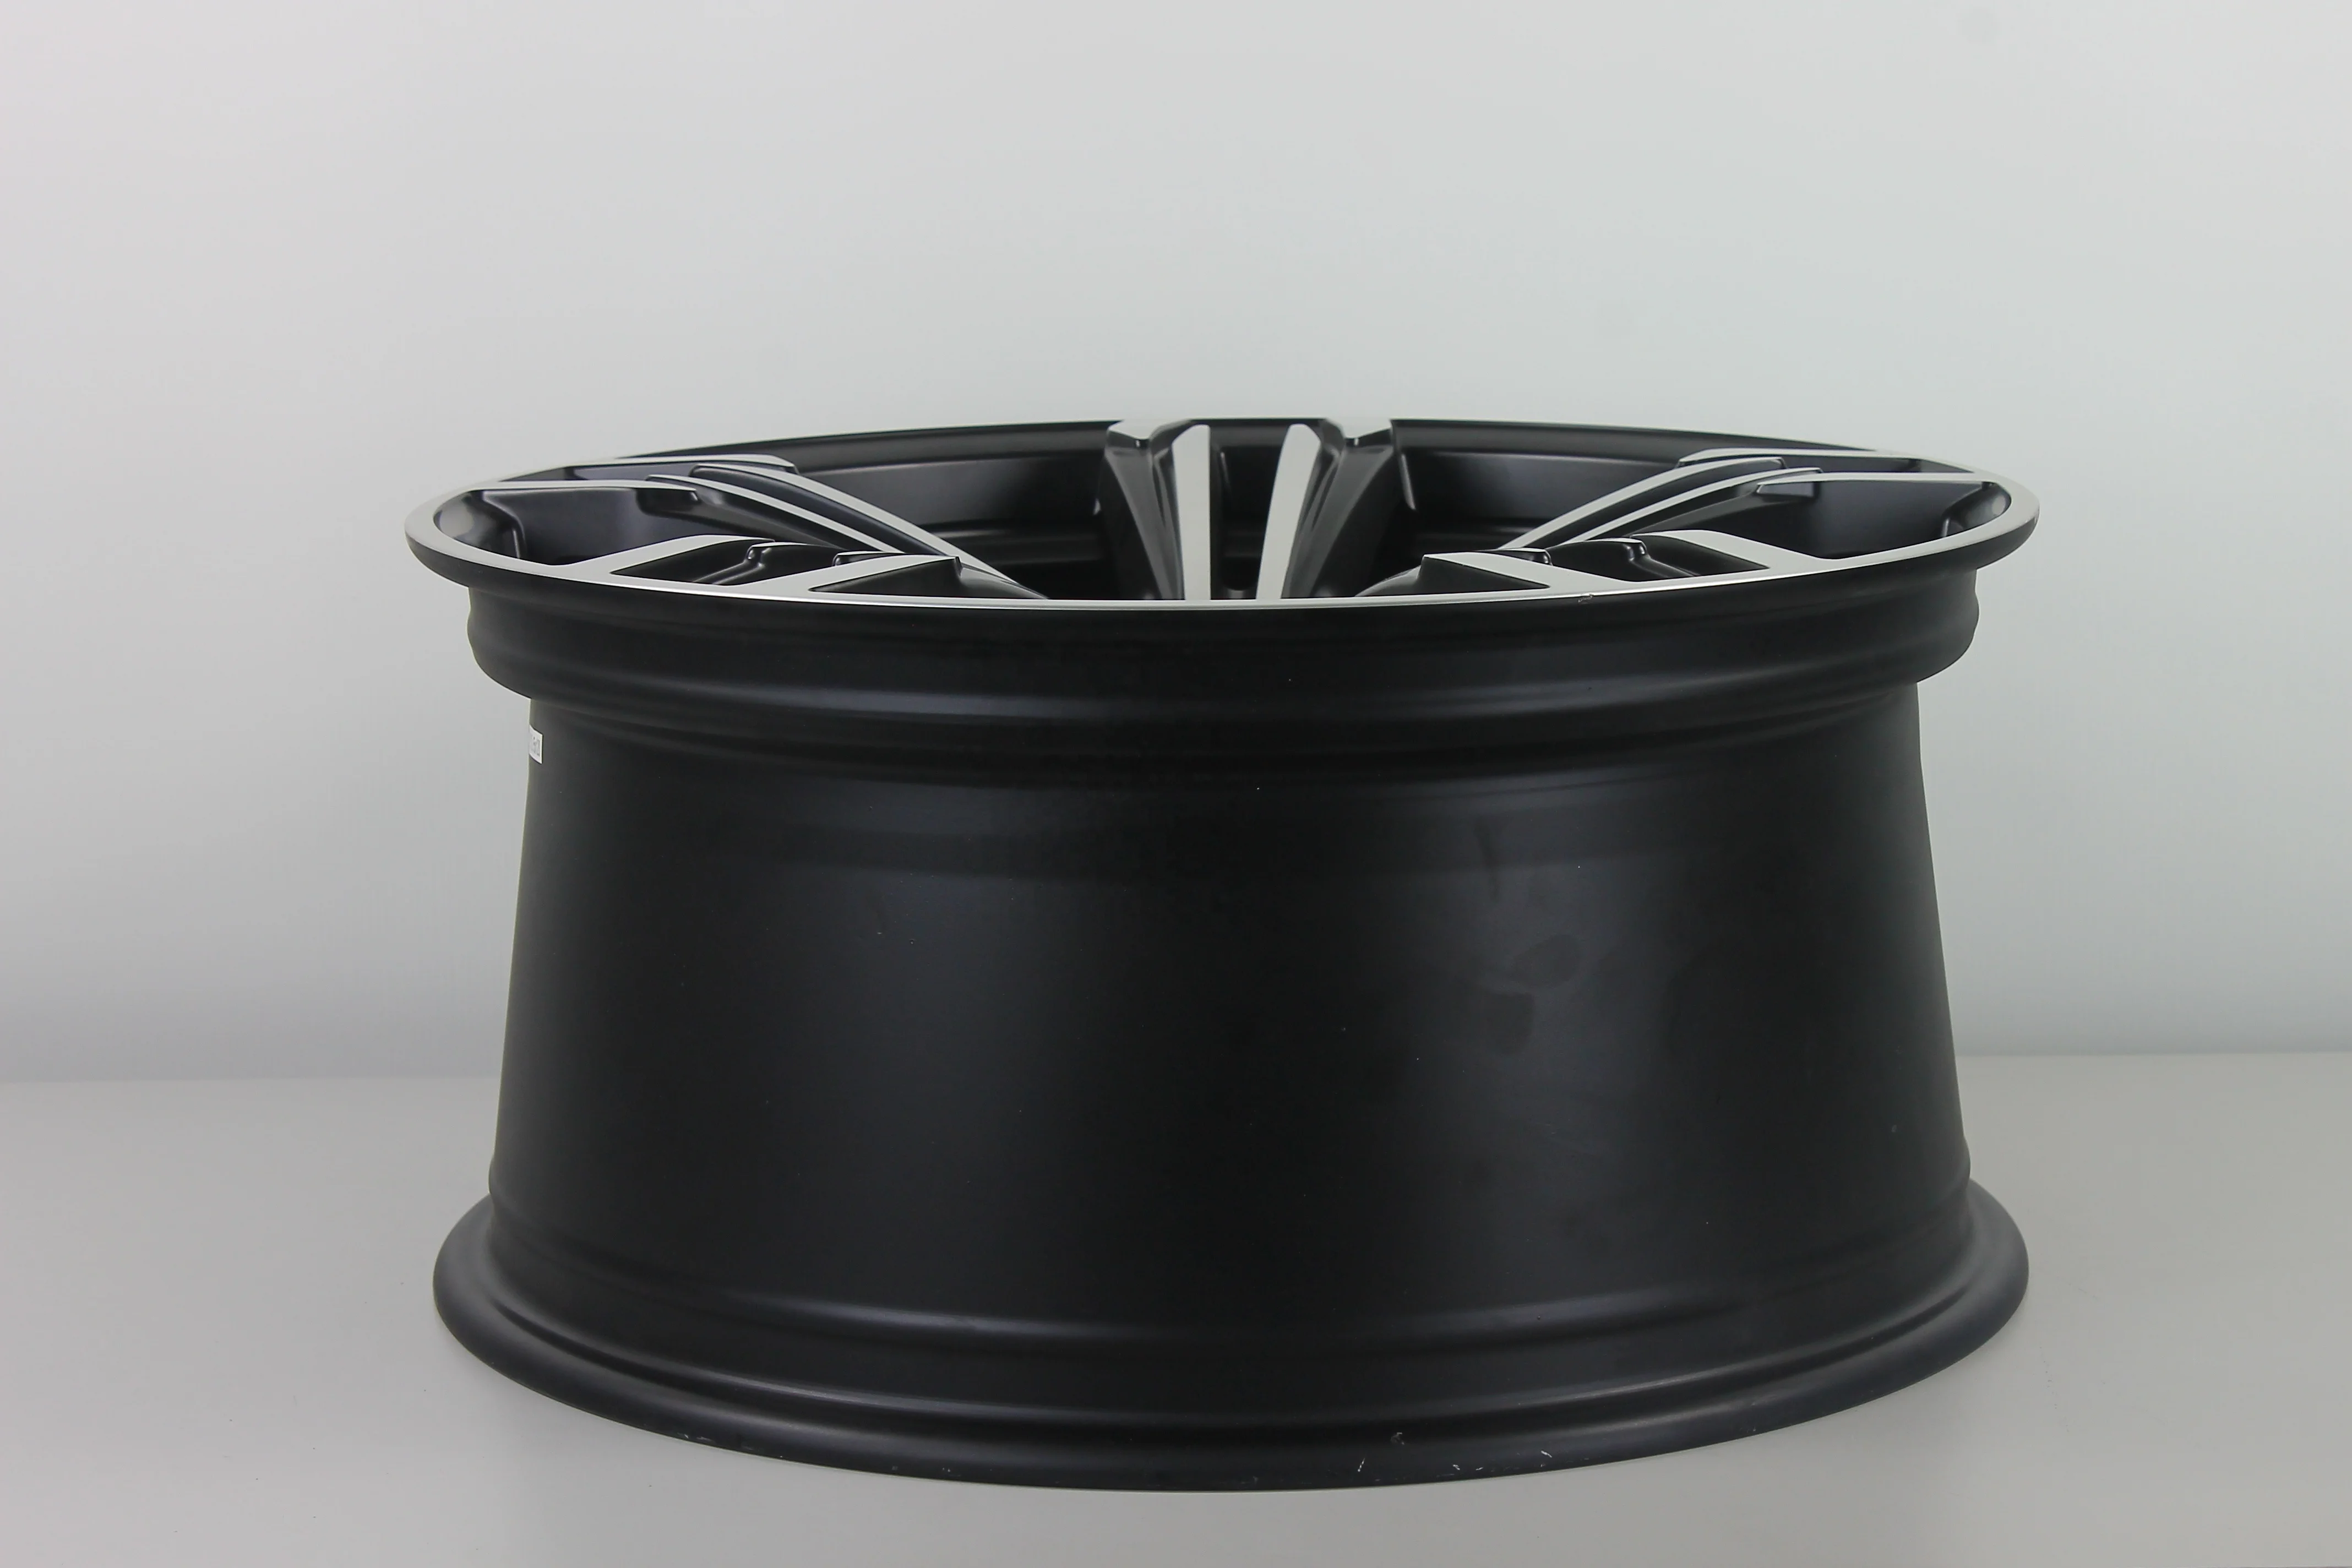 
High quality low price 16 inch hot sale alloy wheel fit for BM car wheel 